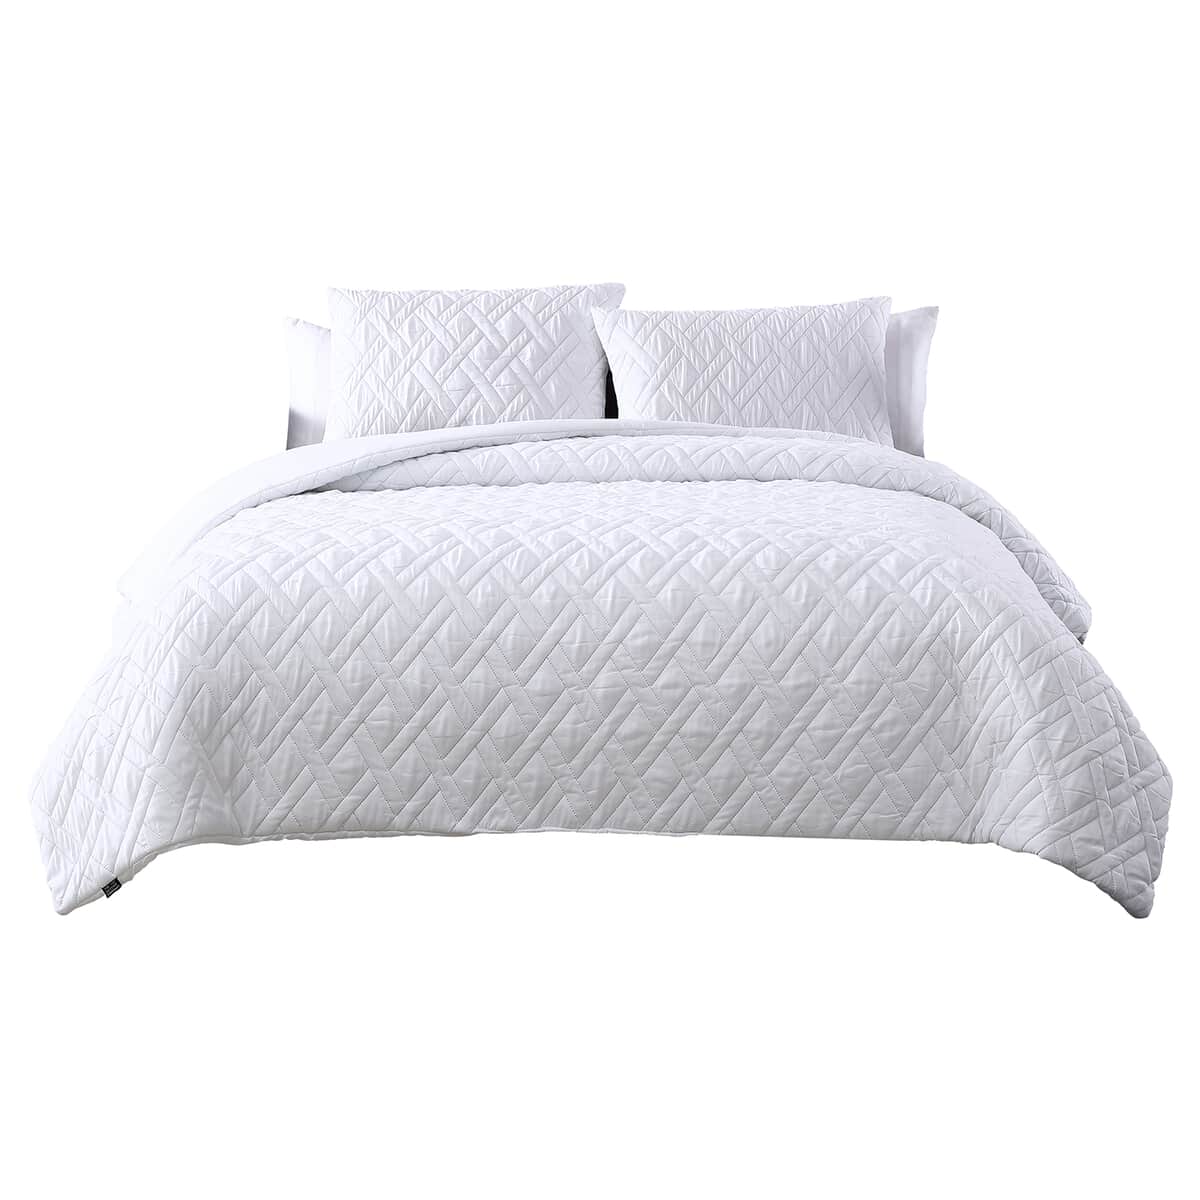 The Nesting Company- Larch 3 Piece Comforter Set - Queen (White) , Bed Comforters , Polyester Comforter , Bedding Sets , Quilt Set image number 3